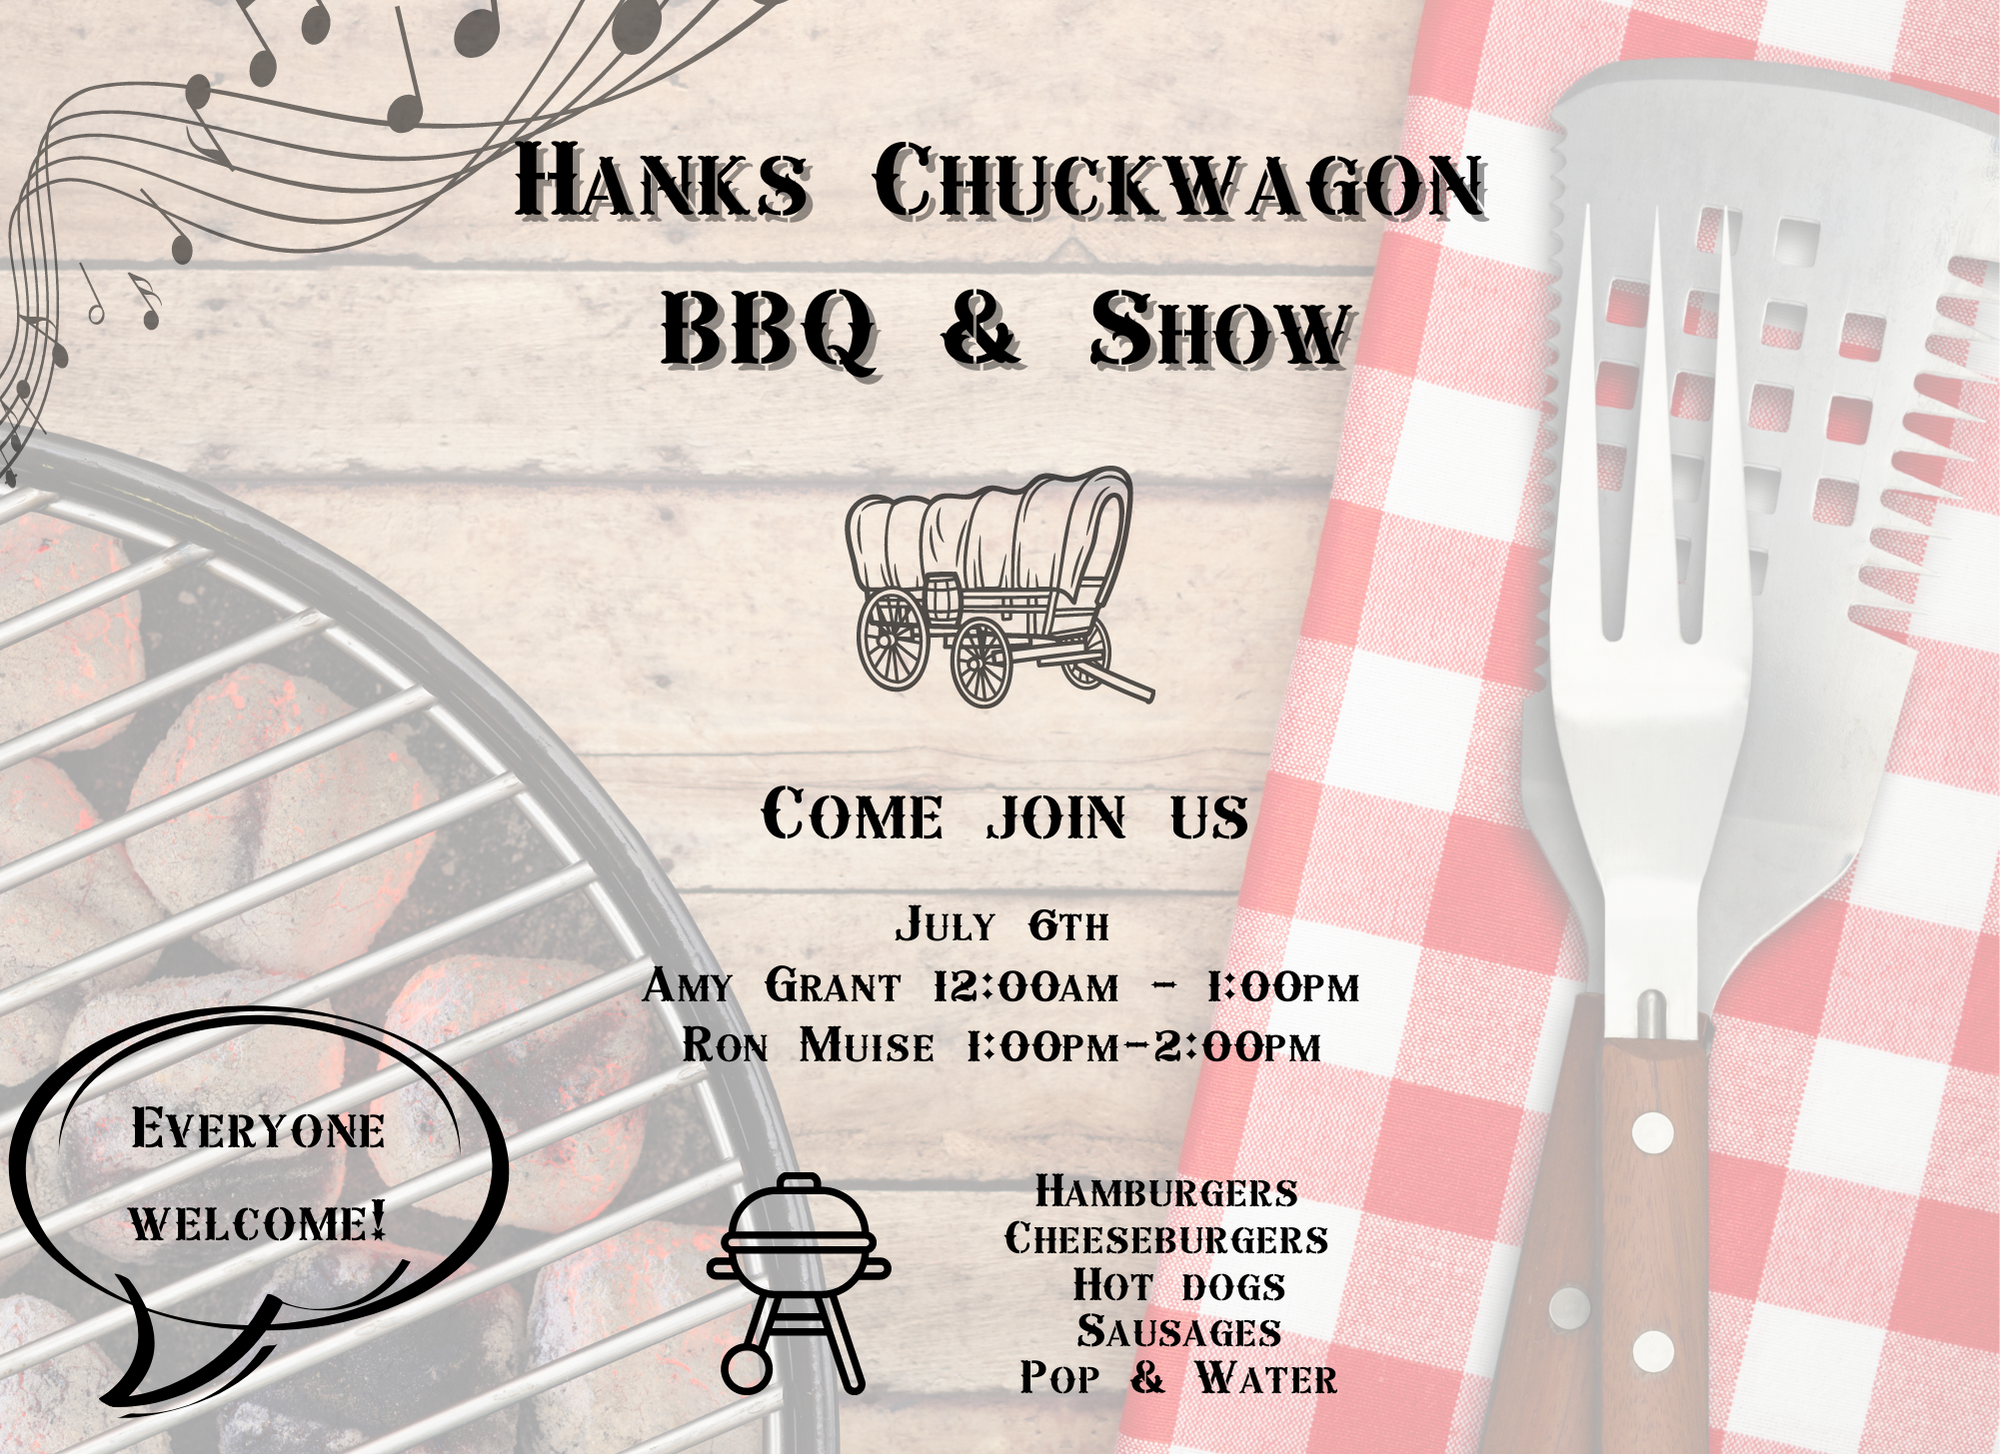 WEDNESDAY JULY 6  BBQ & SHOW FEATURES AMY GRANT & RON MUISE